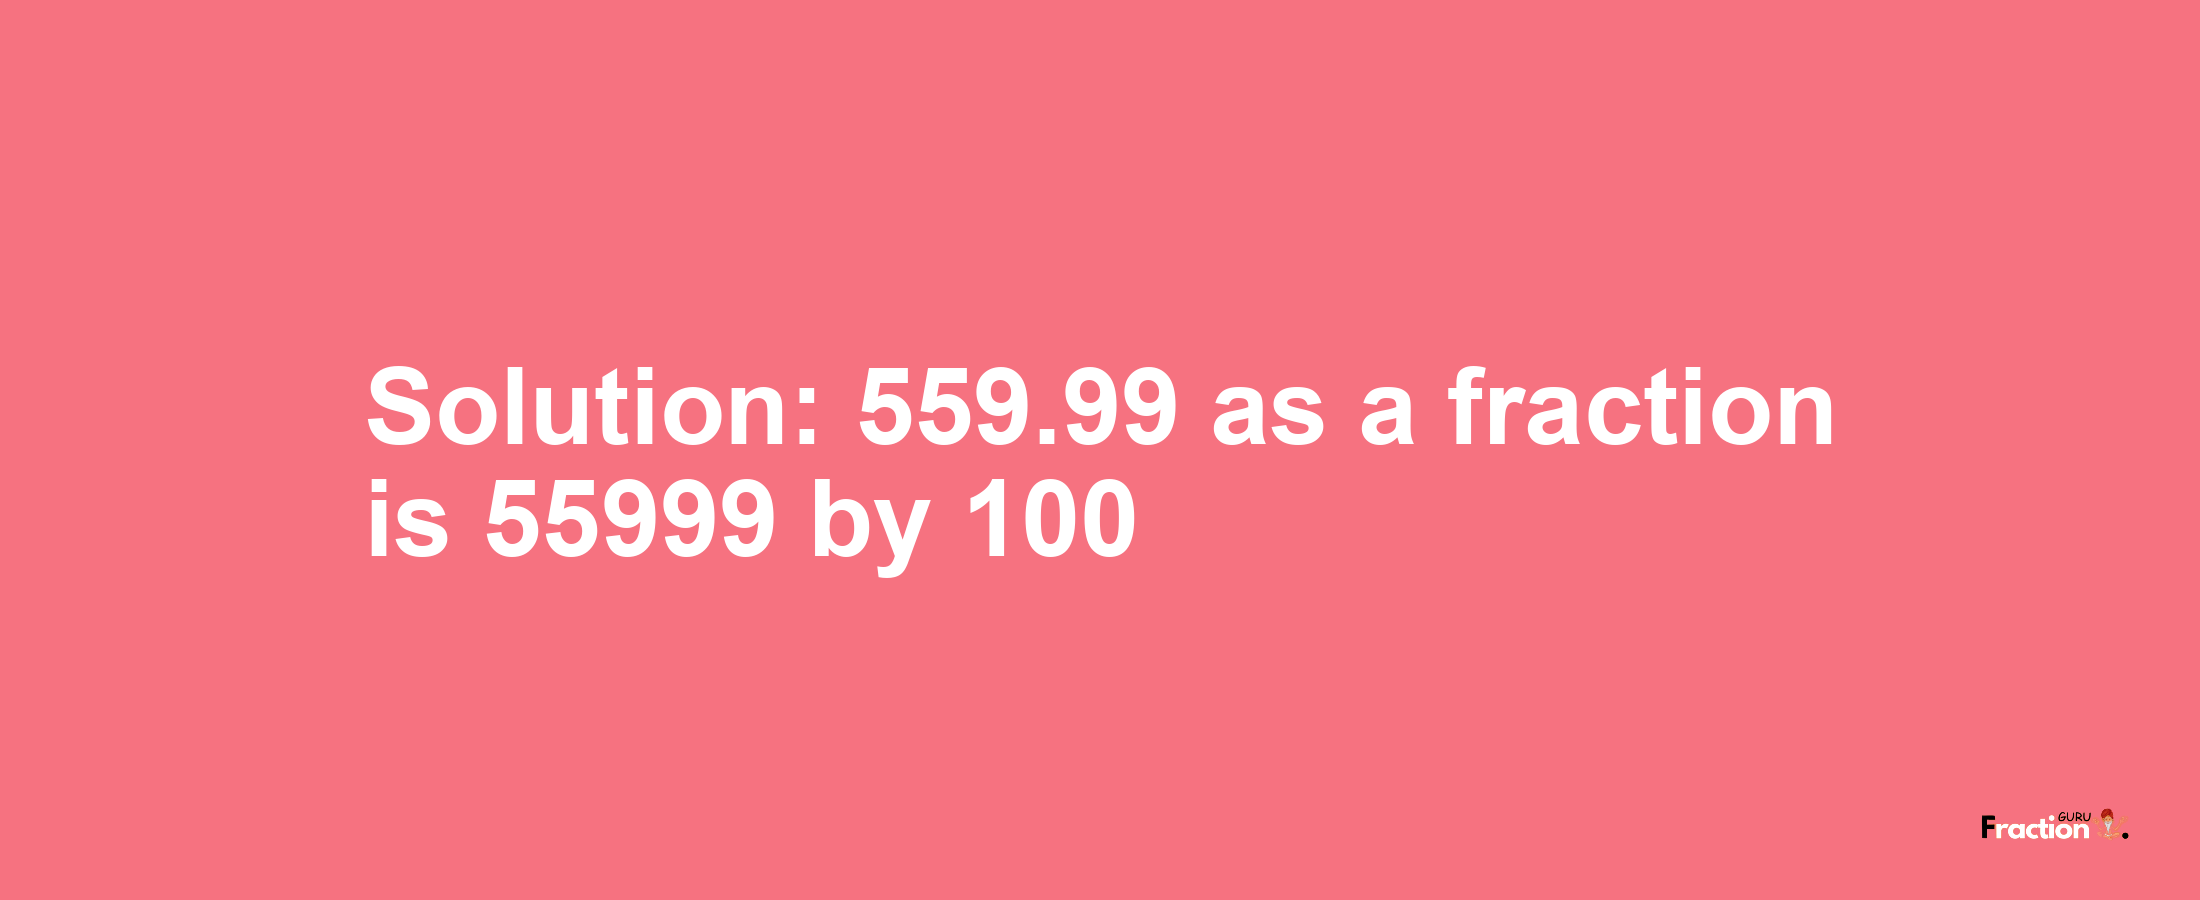 Solution:559.99 as a fraction is 55999/100